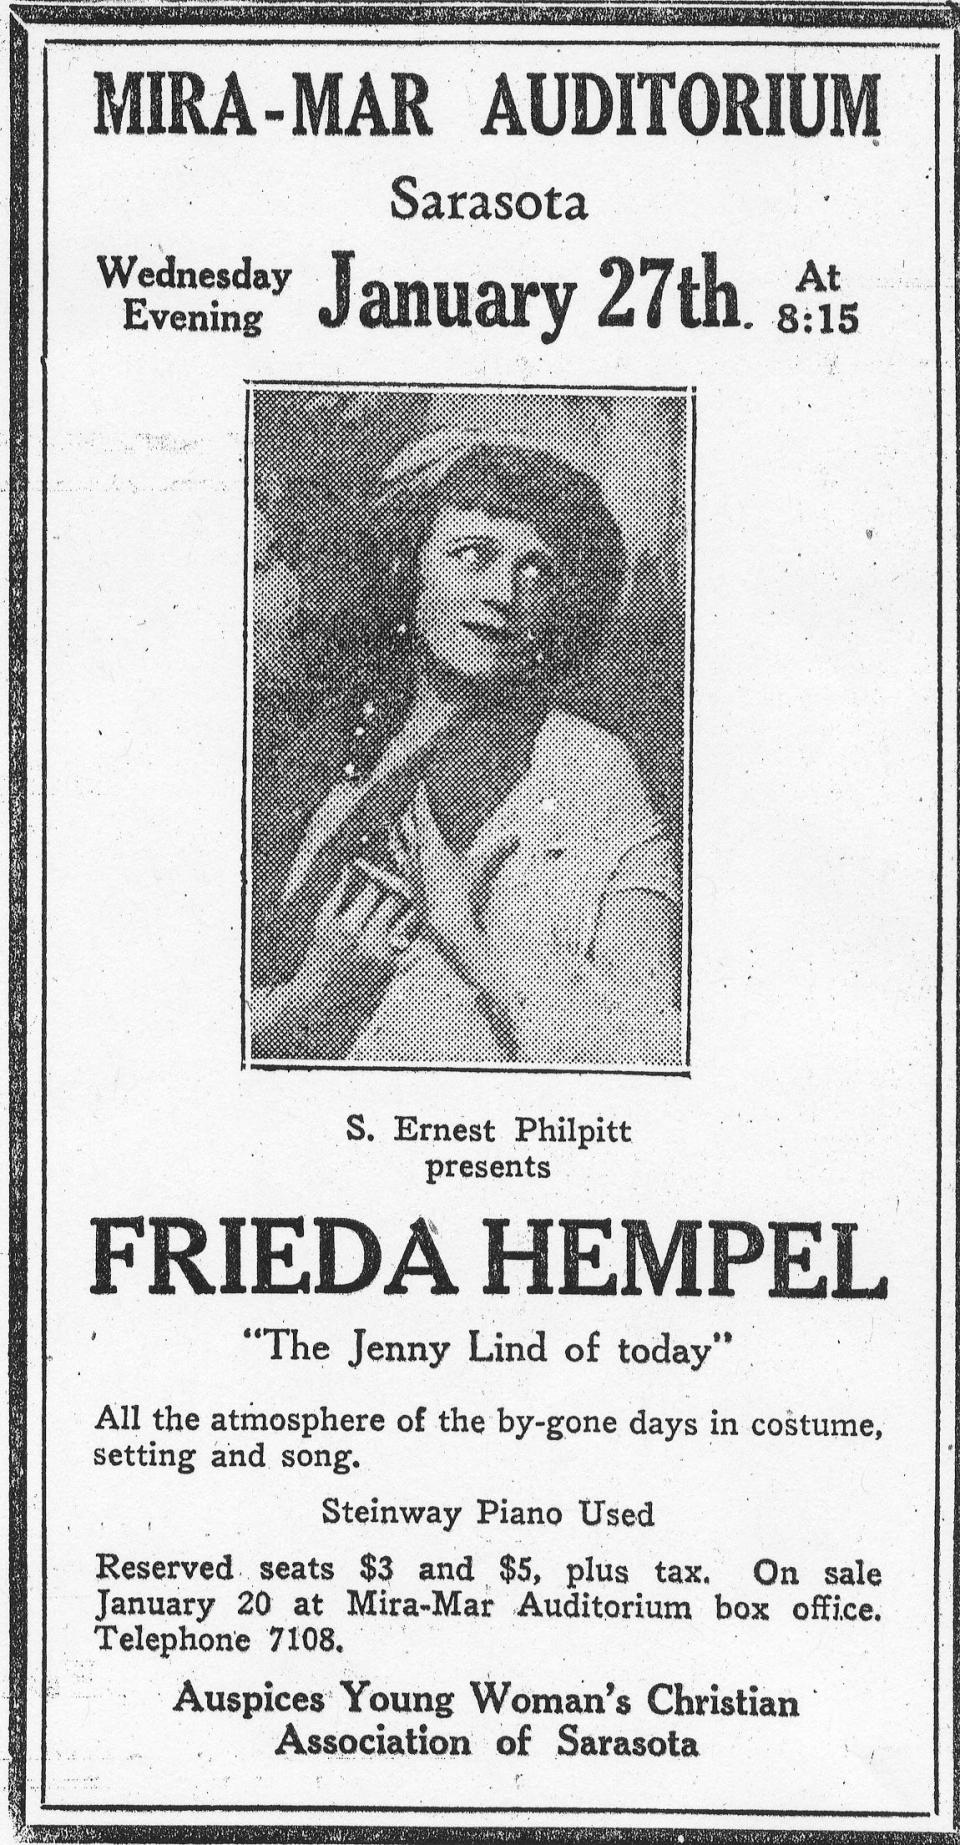 An advertisement for a performance by Frieda Hemple at the Mira Mar Auditorium in the mid-1920s.